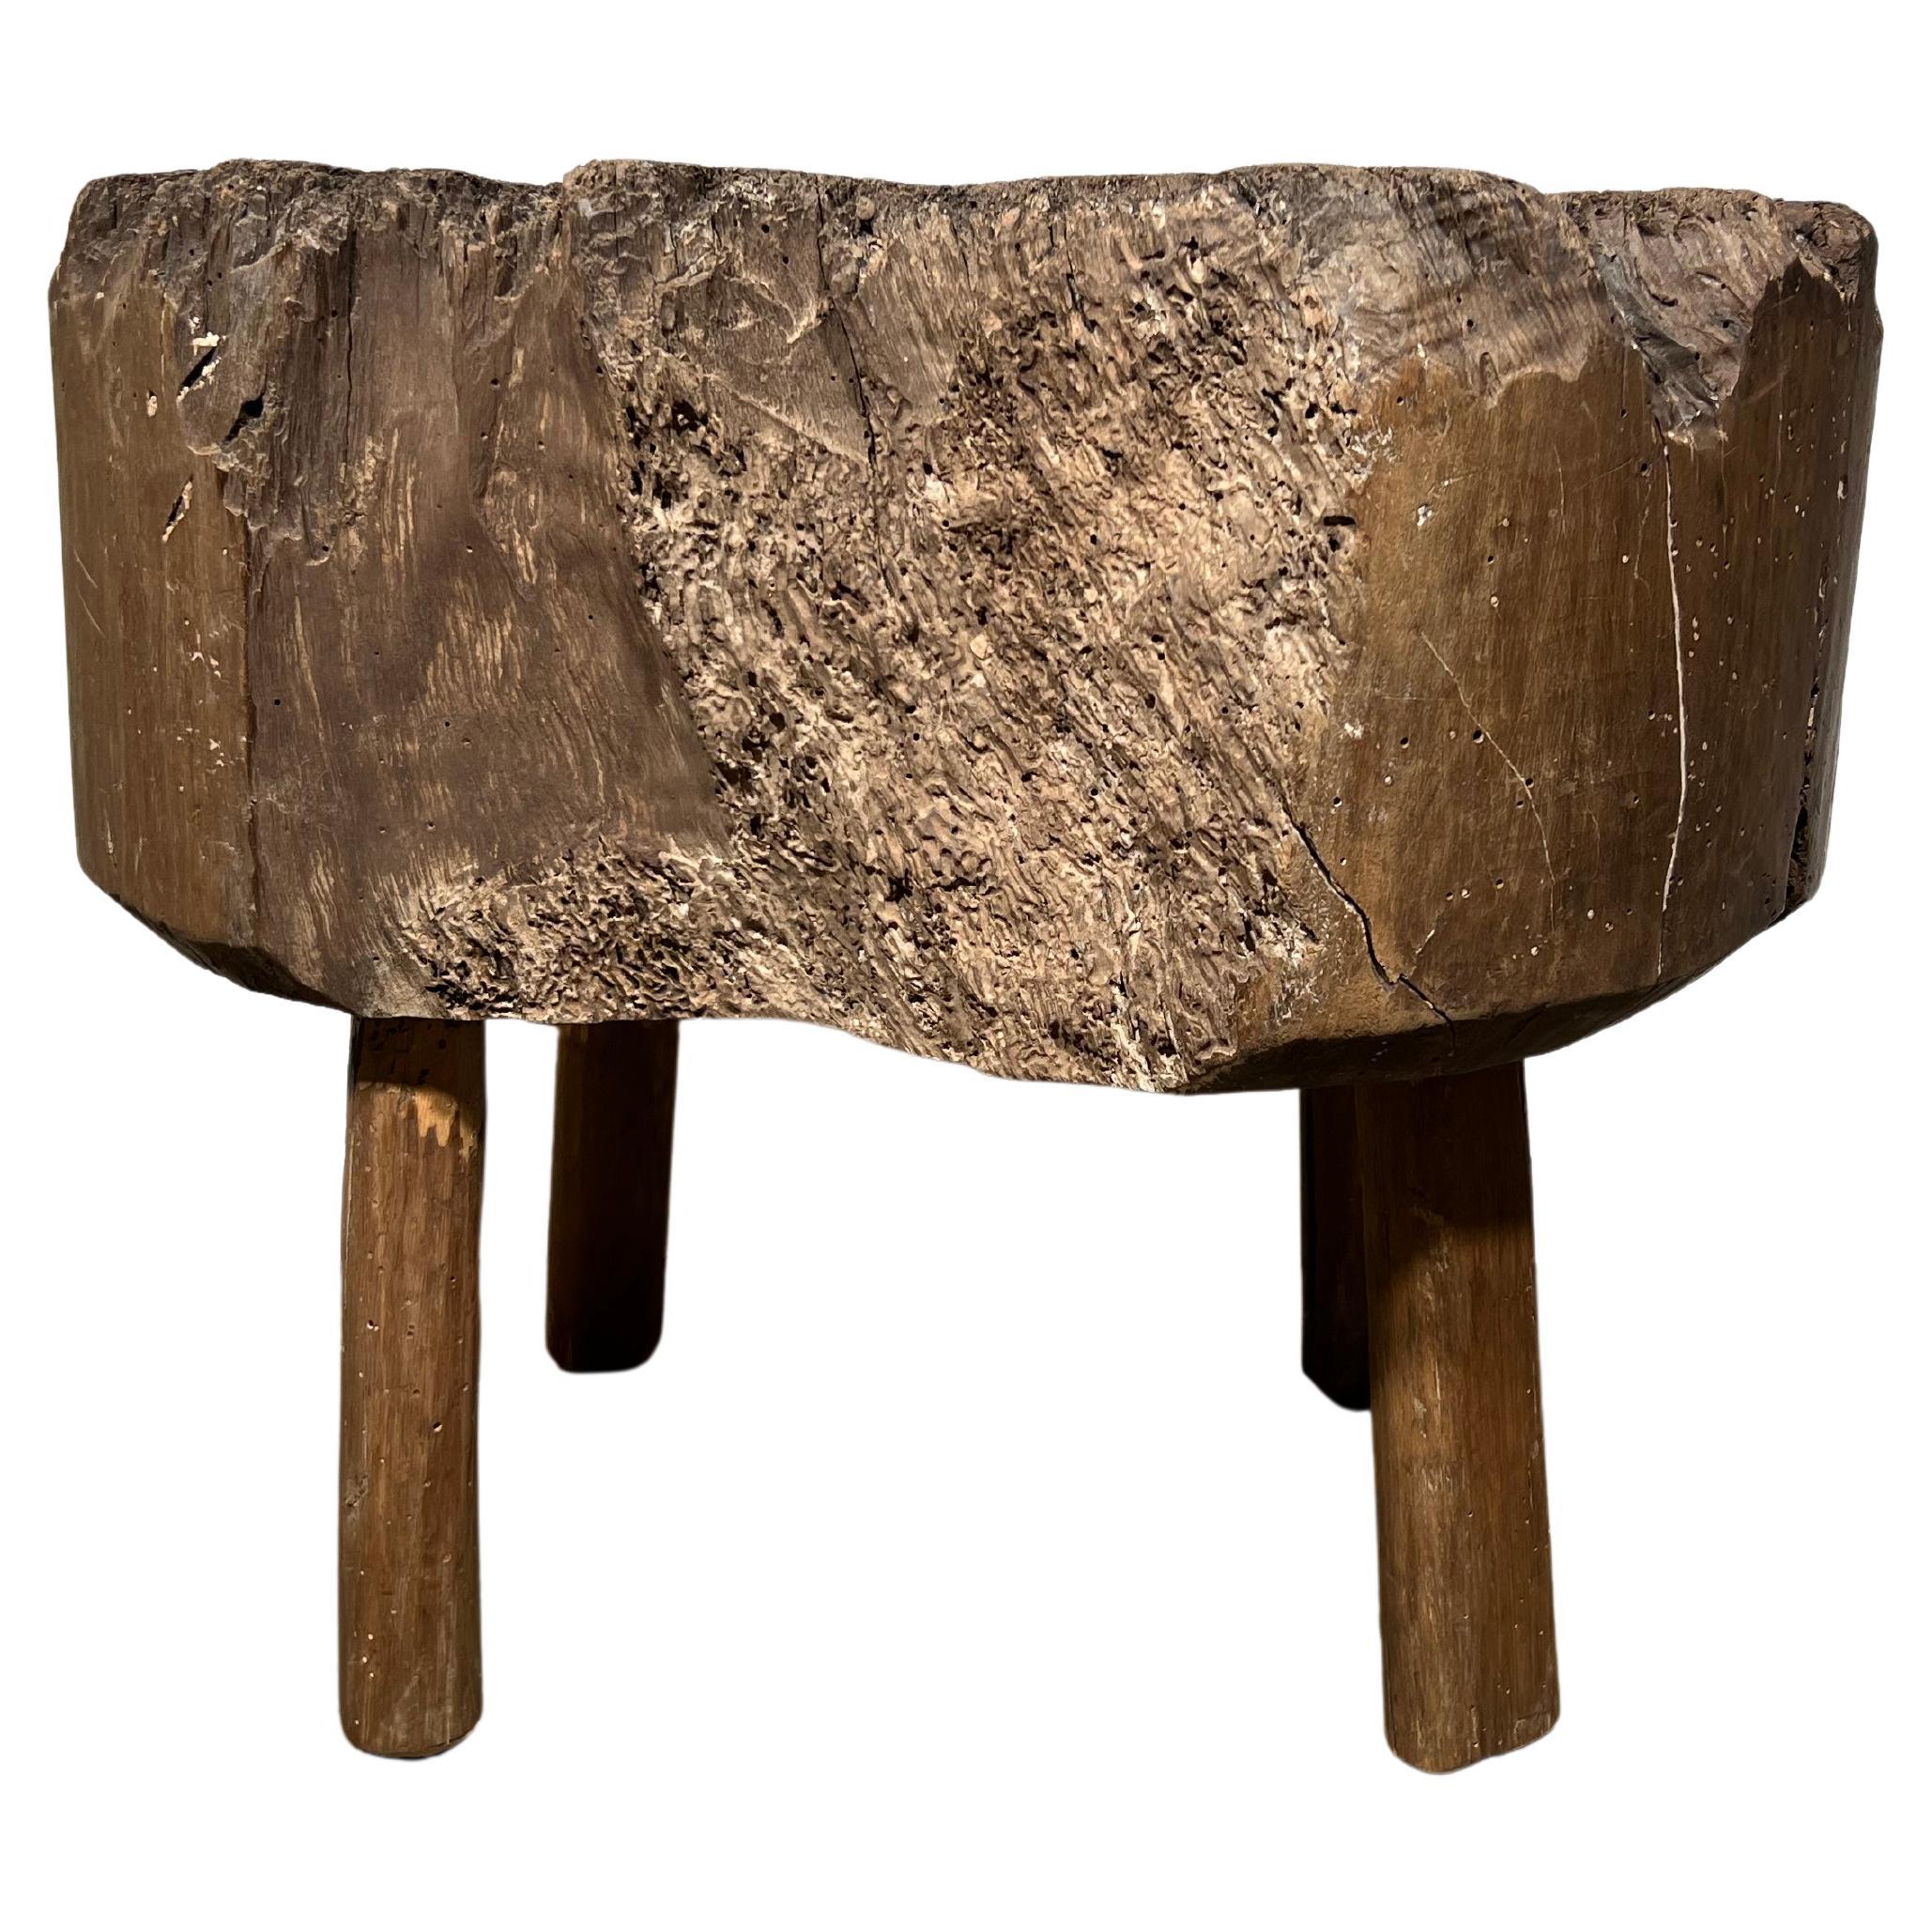 A rustic Billot - chopping block from the South of France. Wonderful as a side table in a casual or modern setting.